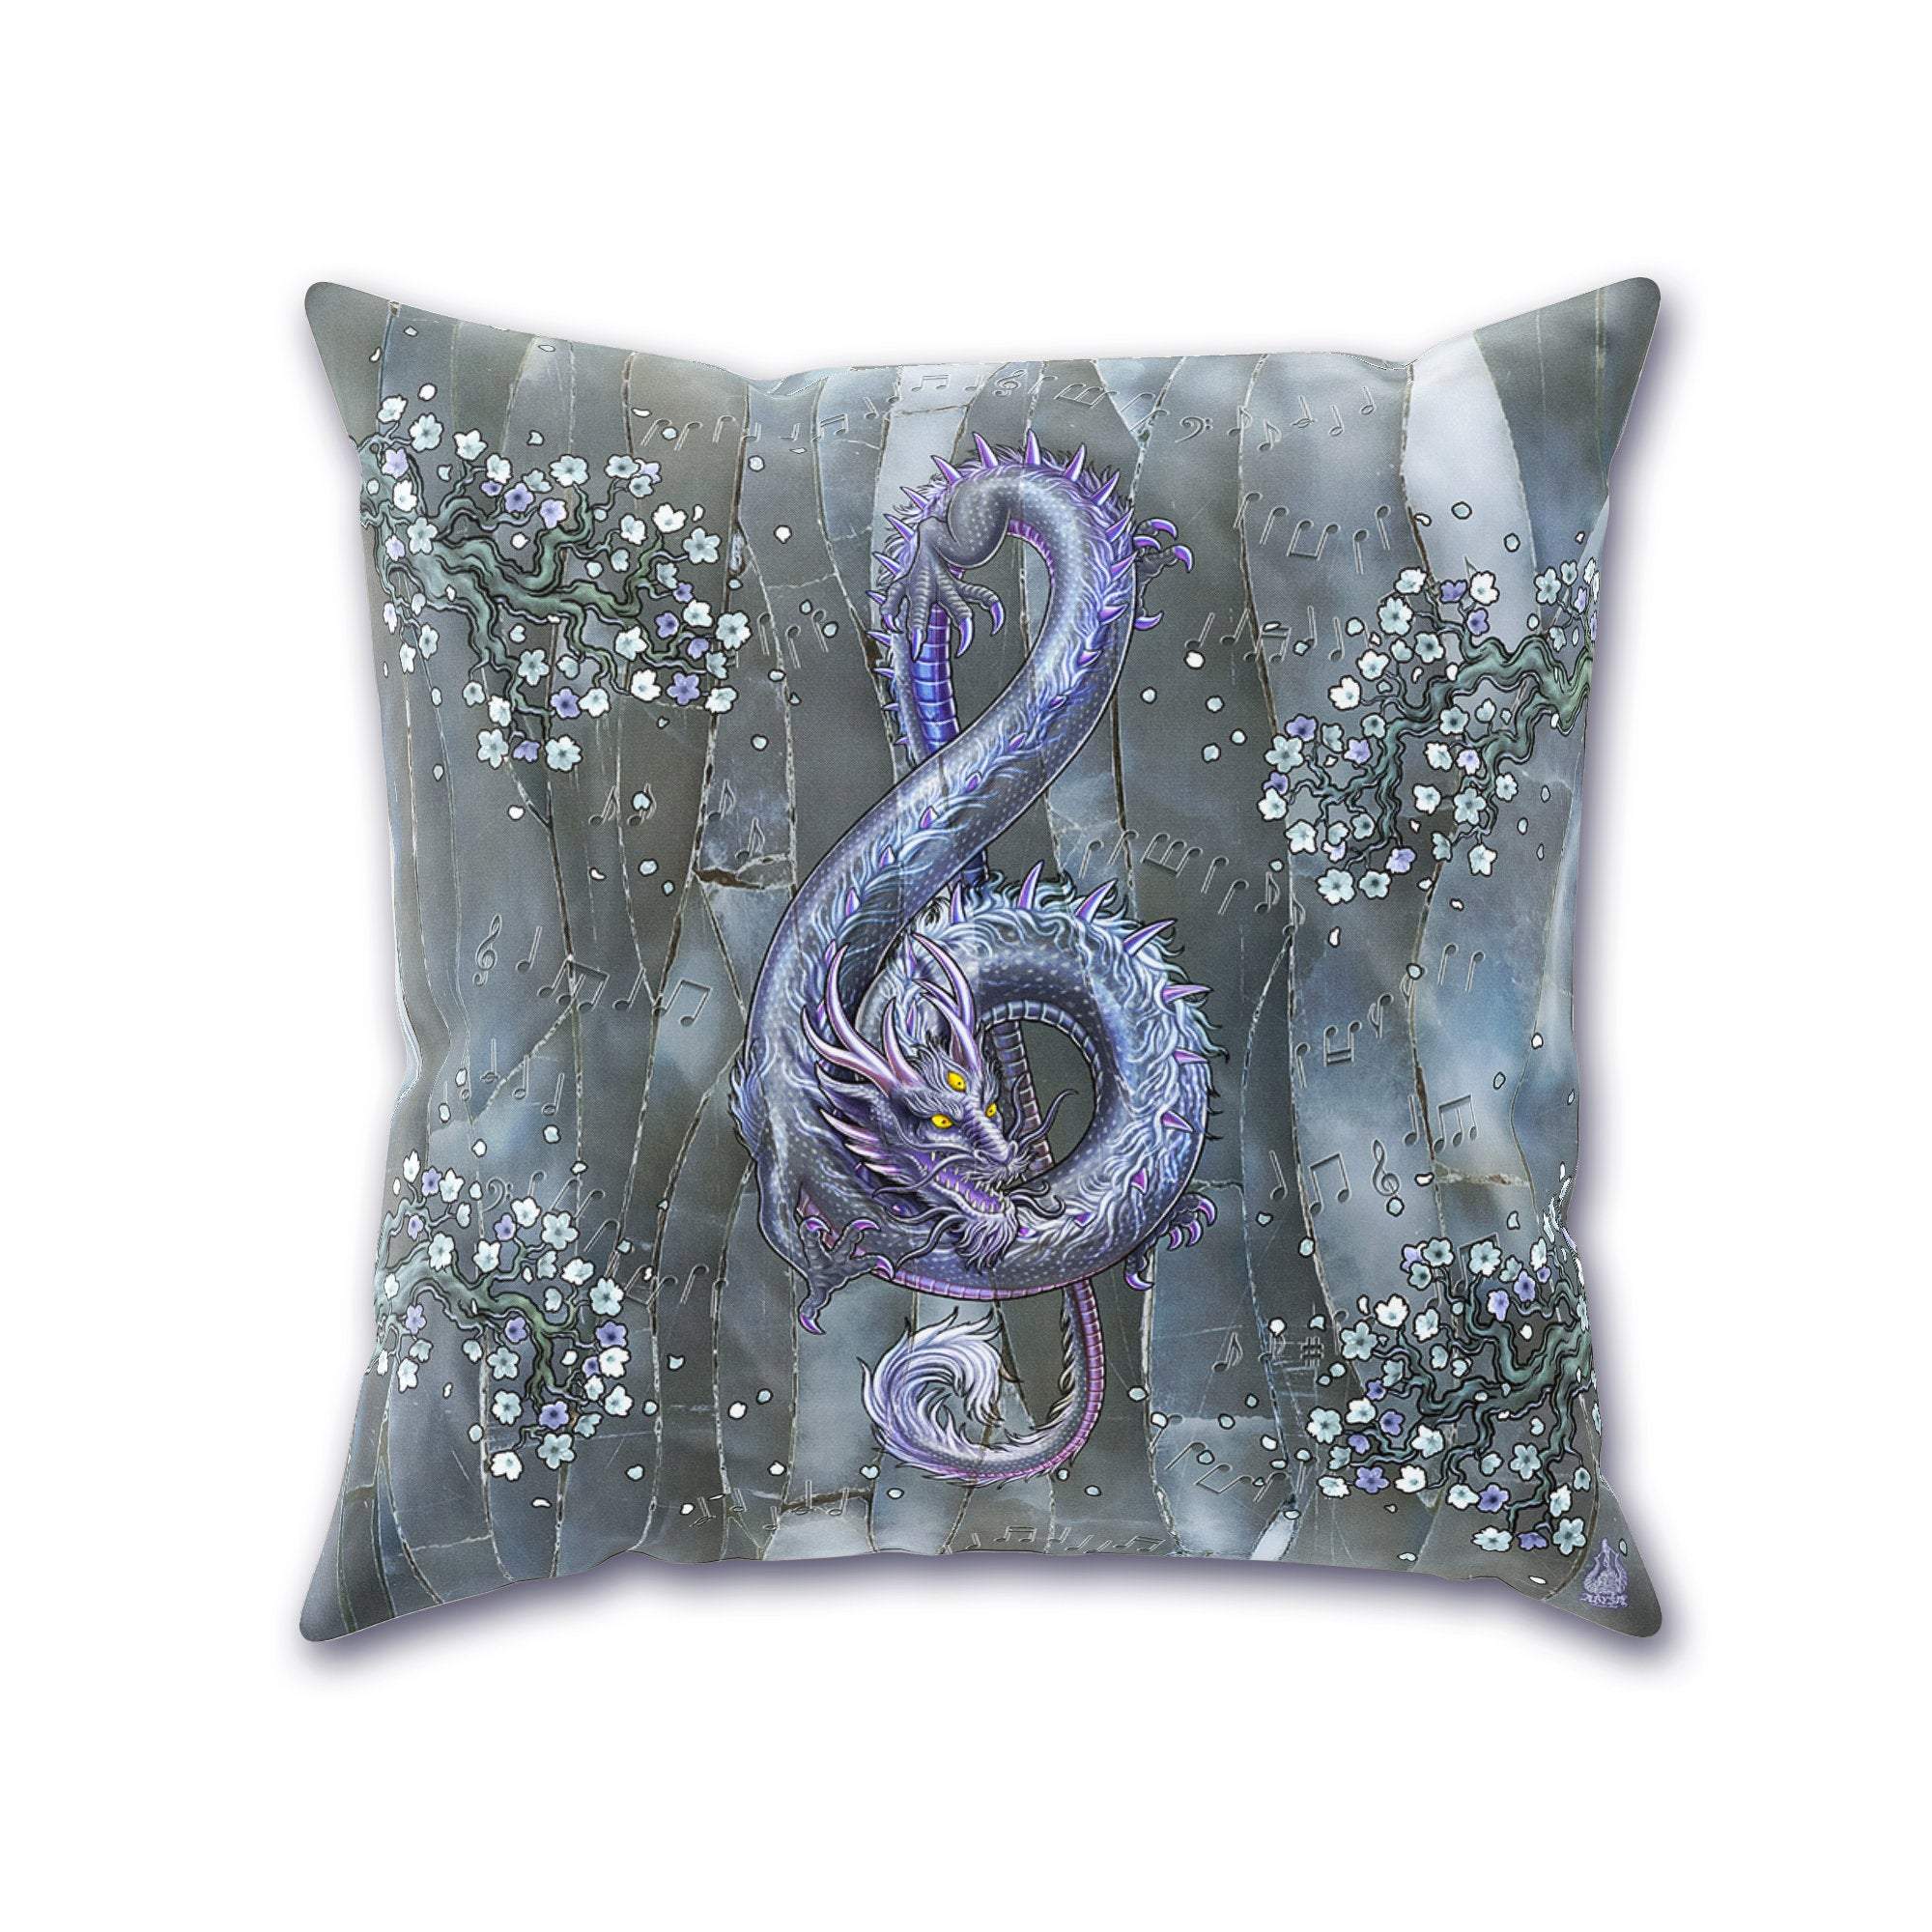 Indie Throw Pillow, Decorative Accent Cushion, Eclectic Design, Music Room Decor - Treble Clef Dragon, Gemstone, Stone - Abysm Internal